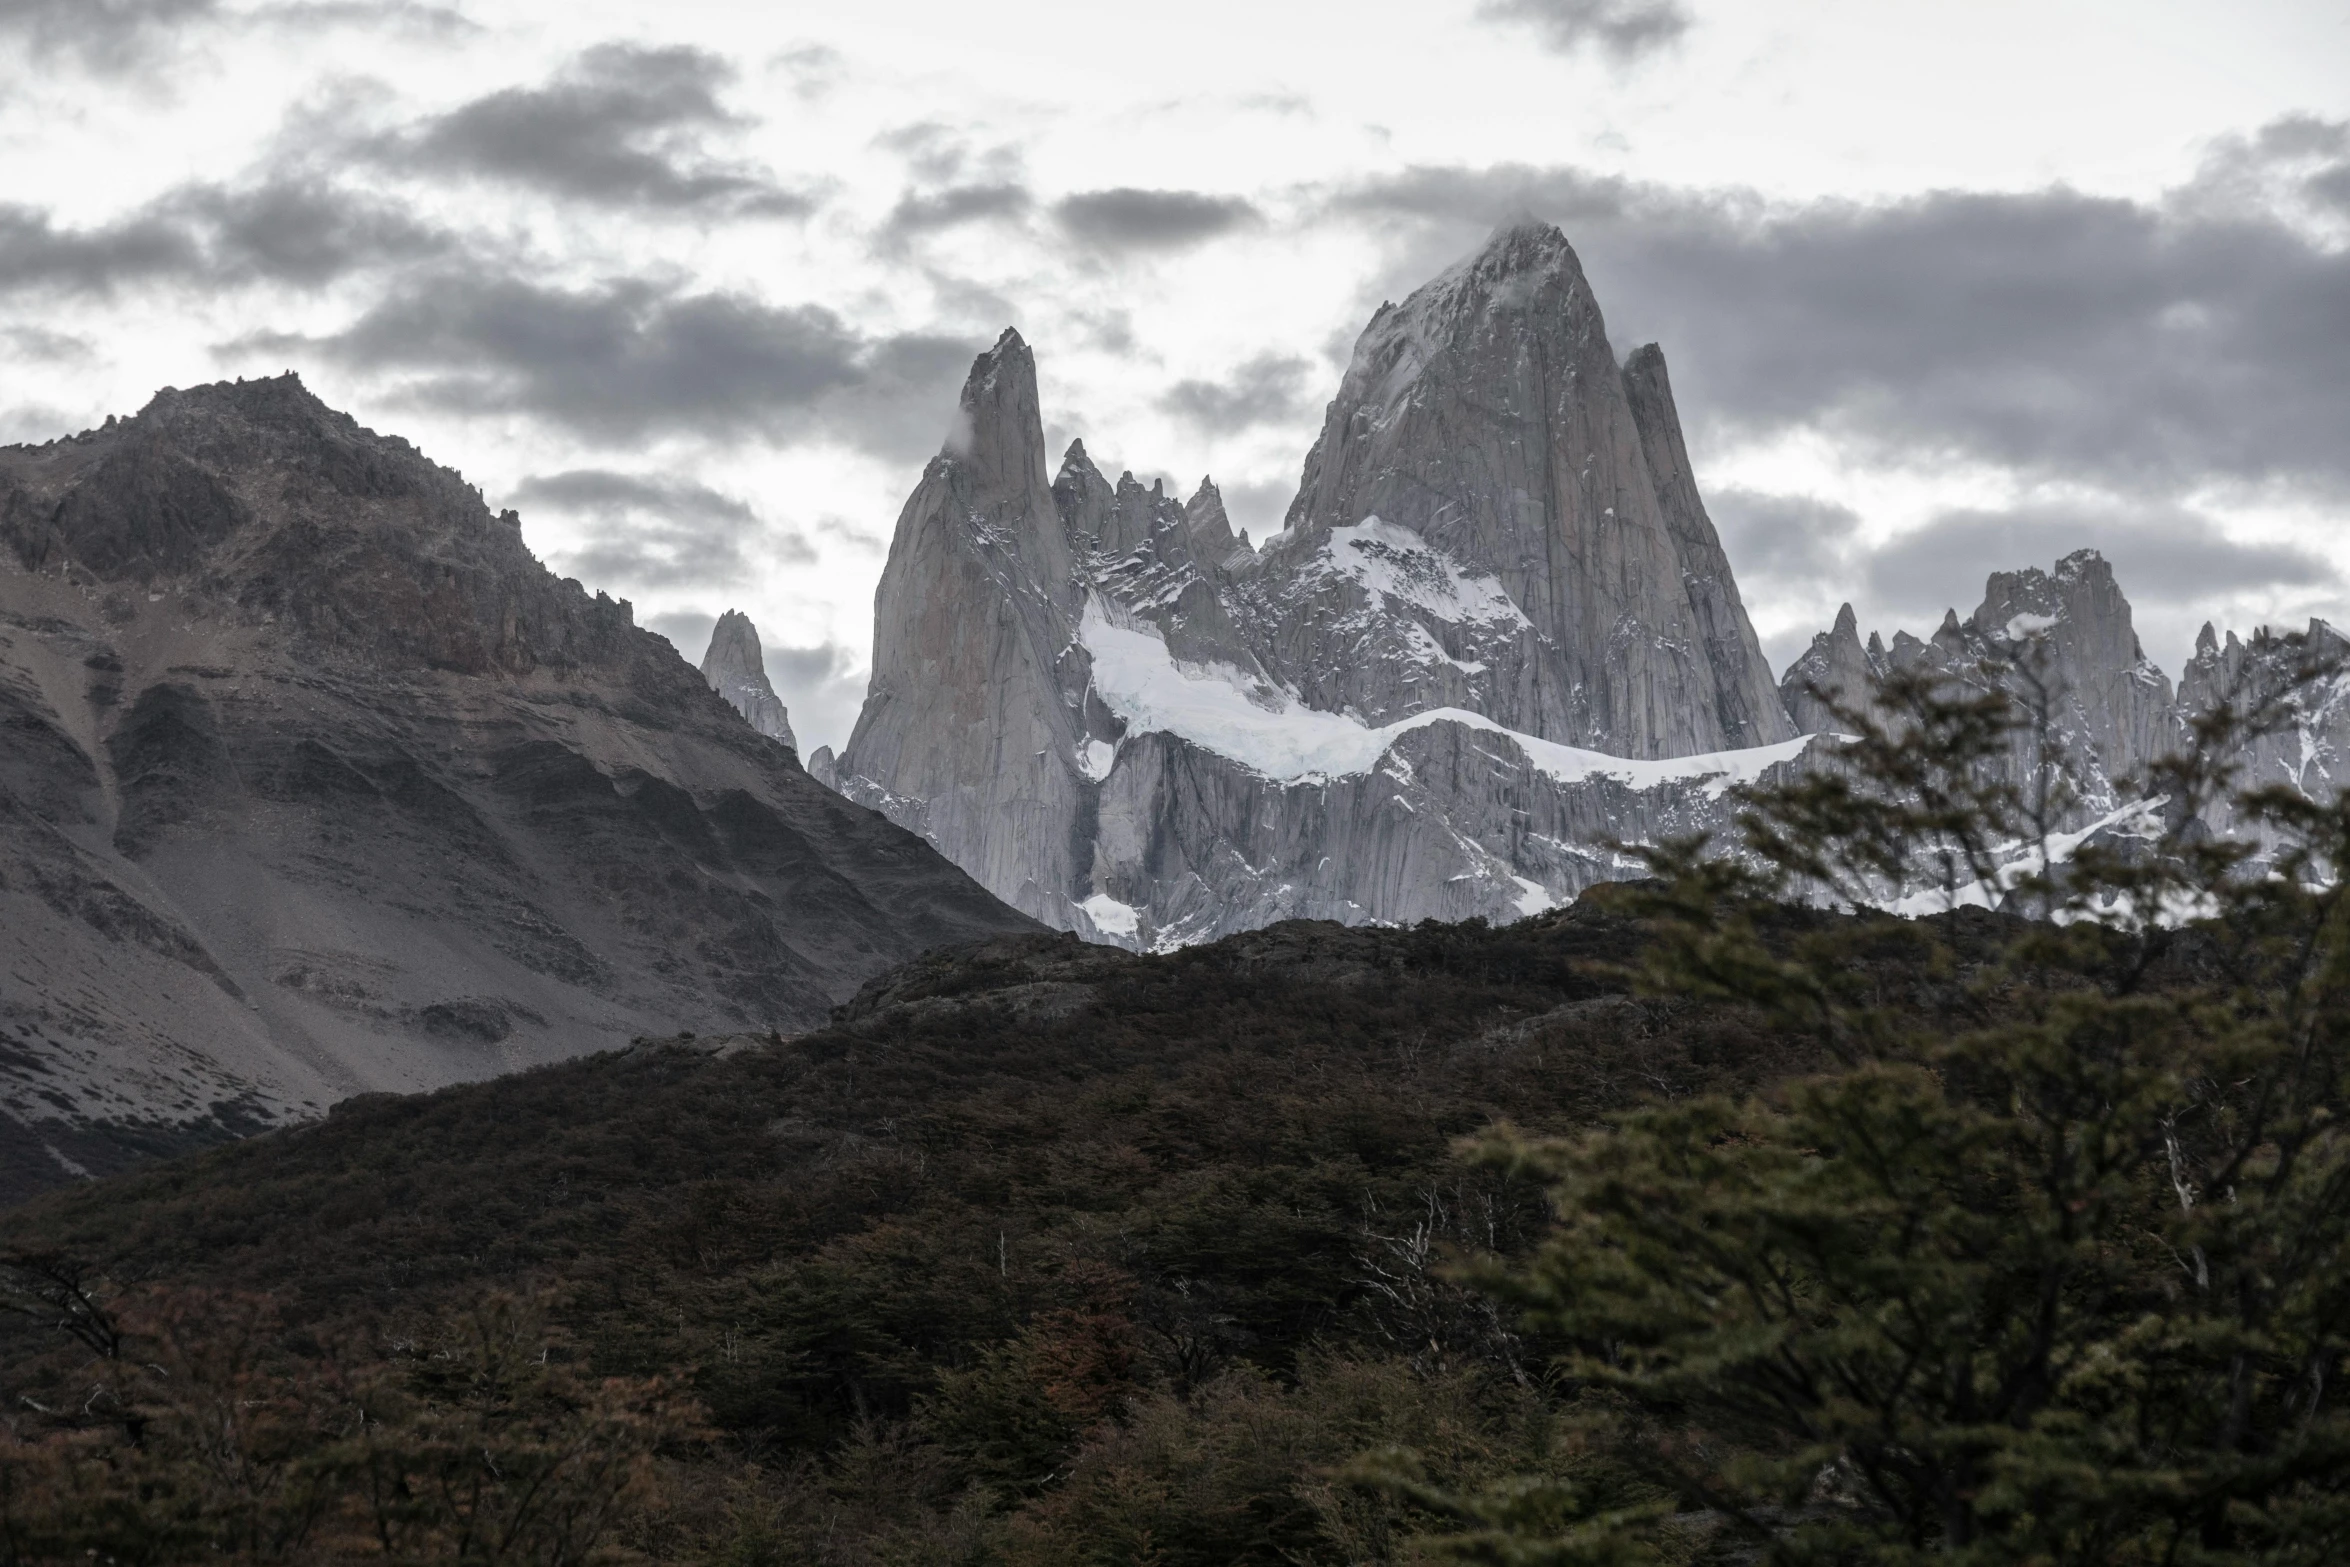 a herd of sheep grazing on top of a lush green hillside, by Matteo Pérez, unsplash contest winner, tall stone spires, patagonian, with dark trees in foreground, with a snowy mountain and ice